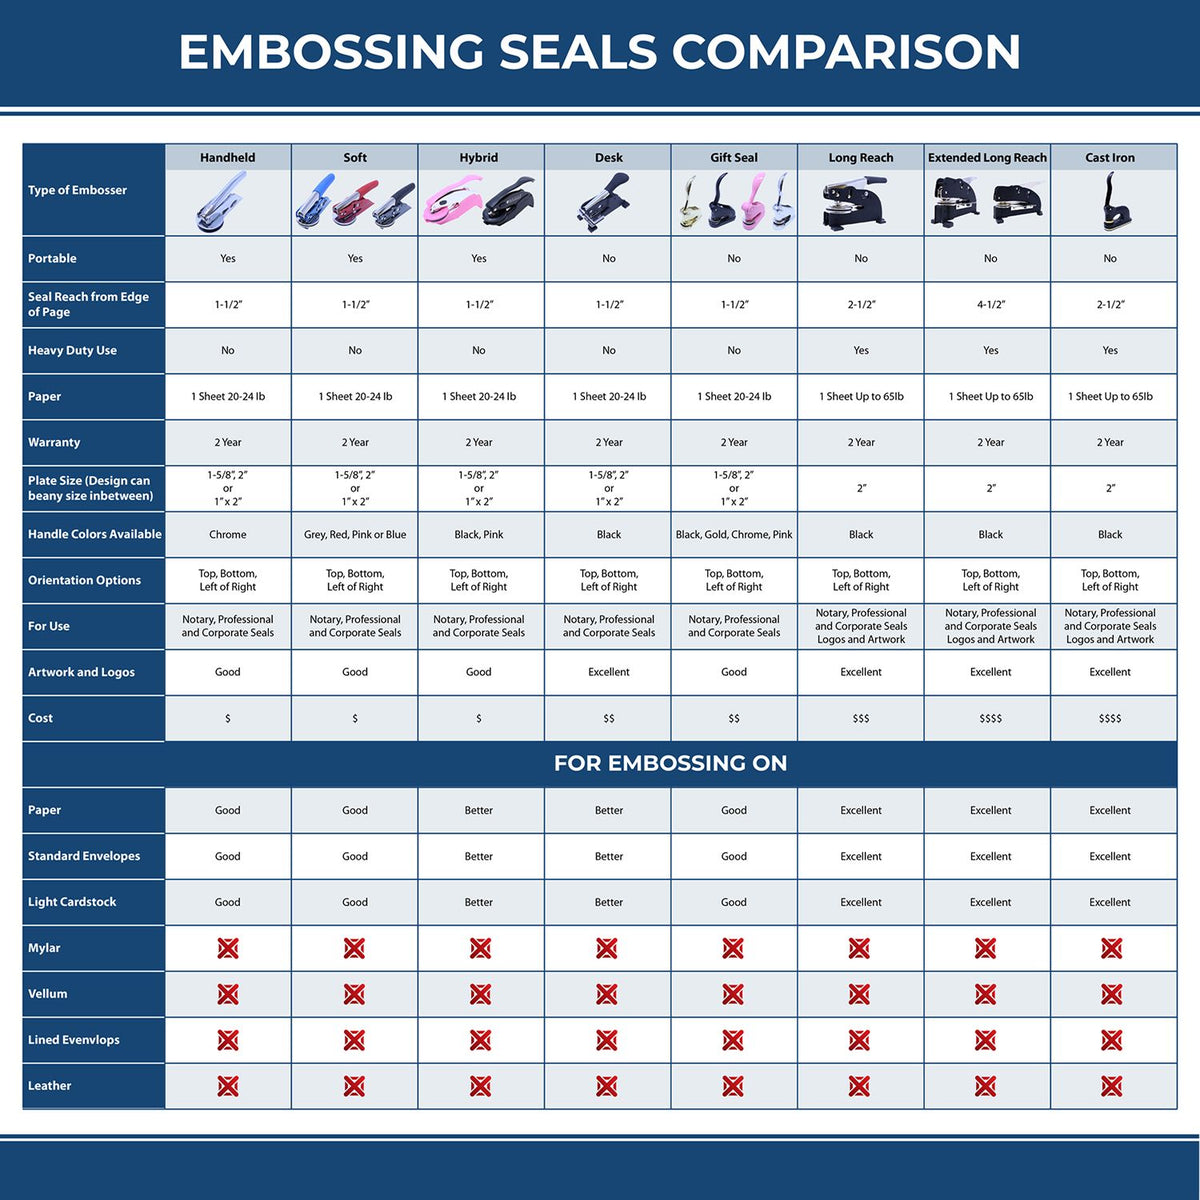 A comparison chart for the different types of mount models available for the State of Nevada Soft Land Surveyor Embossing Seal.